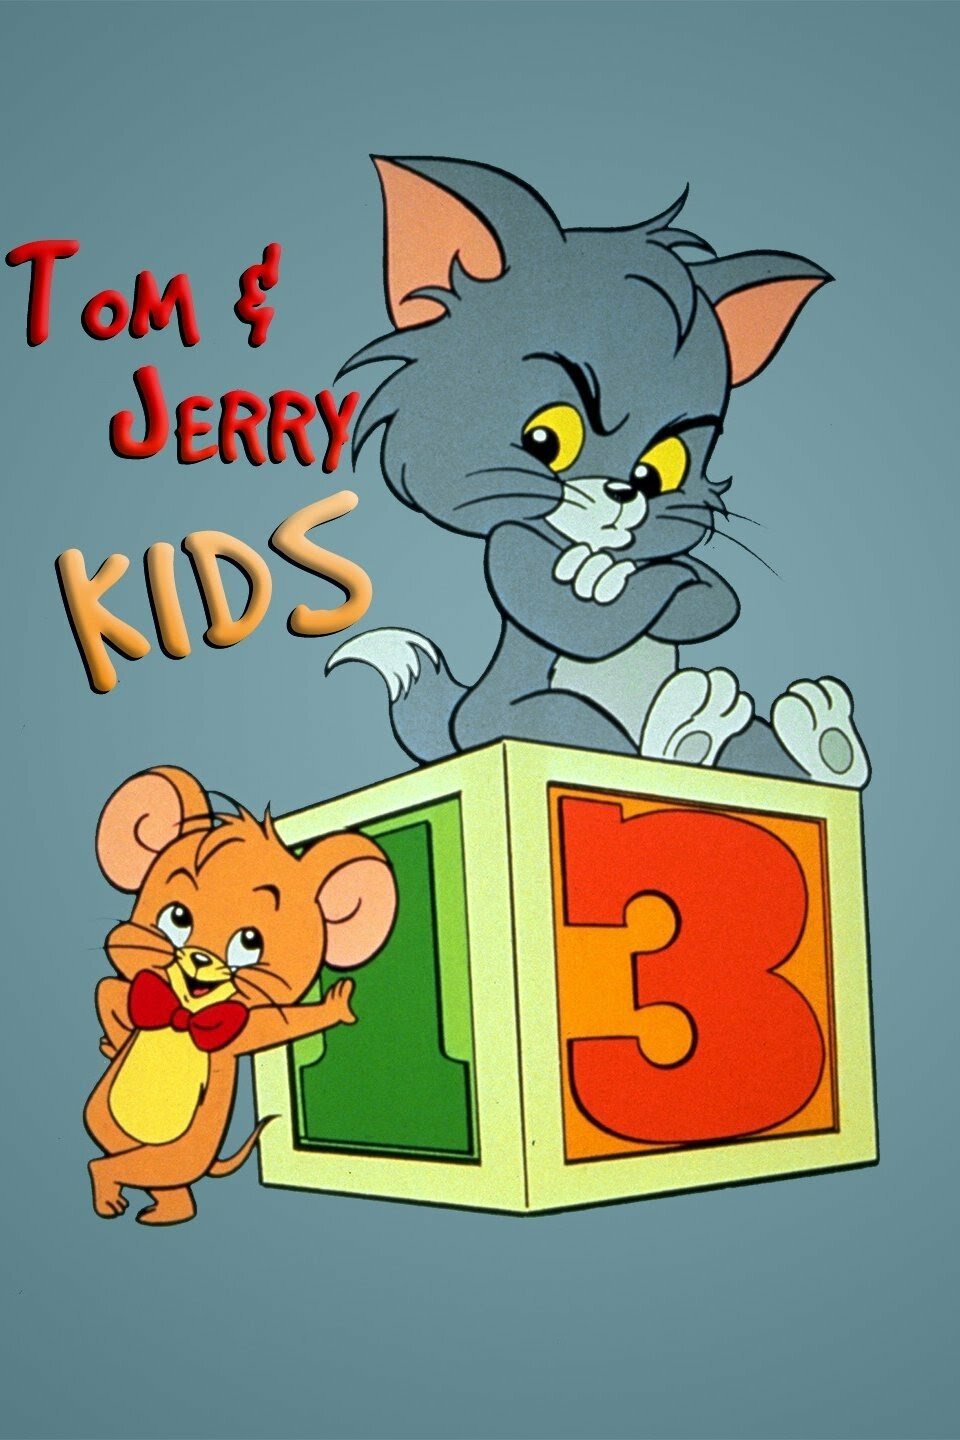 Tom and Jerry best friends